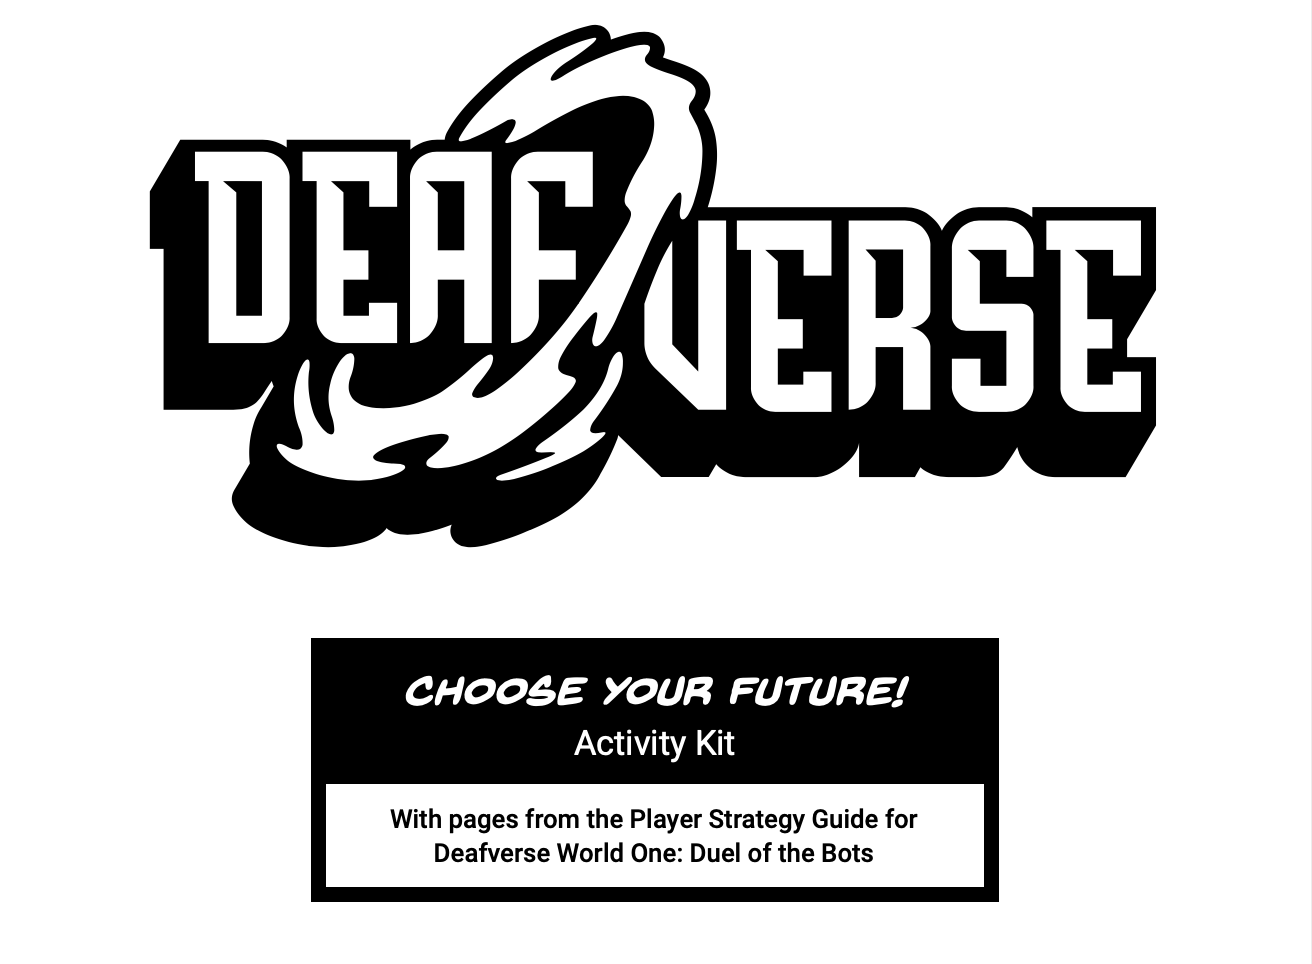 Deafverse logo atop a box labeled "Choose your Future! Activity Kit...With pages from the Player Strategy Guide for Deafverse World One: Duel of the Bots".